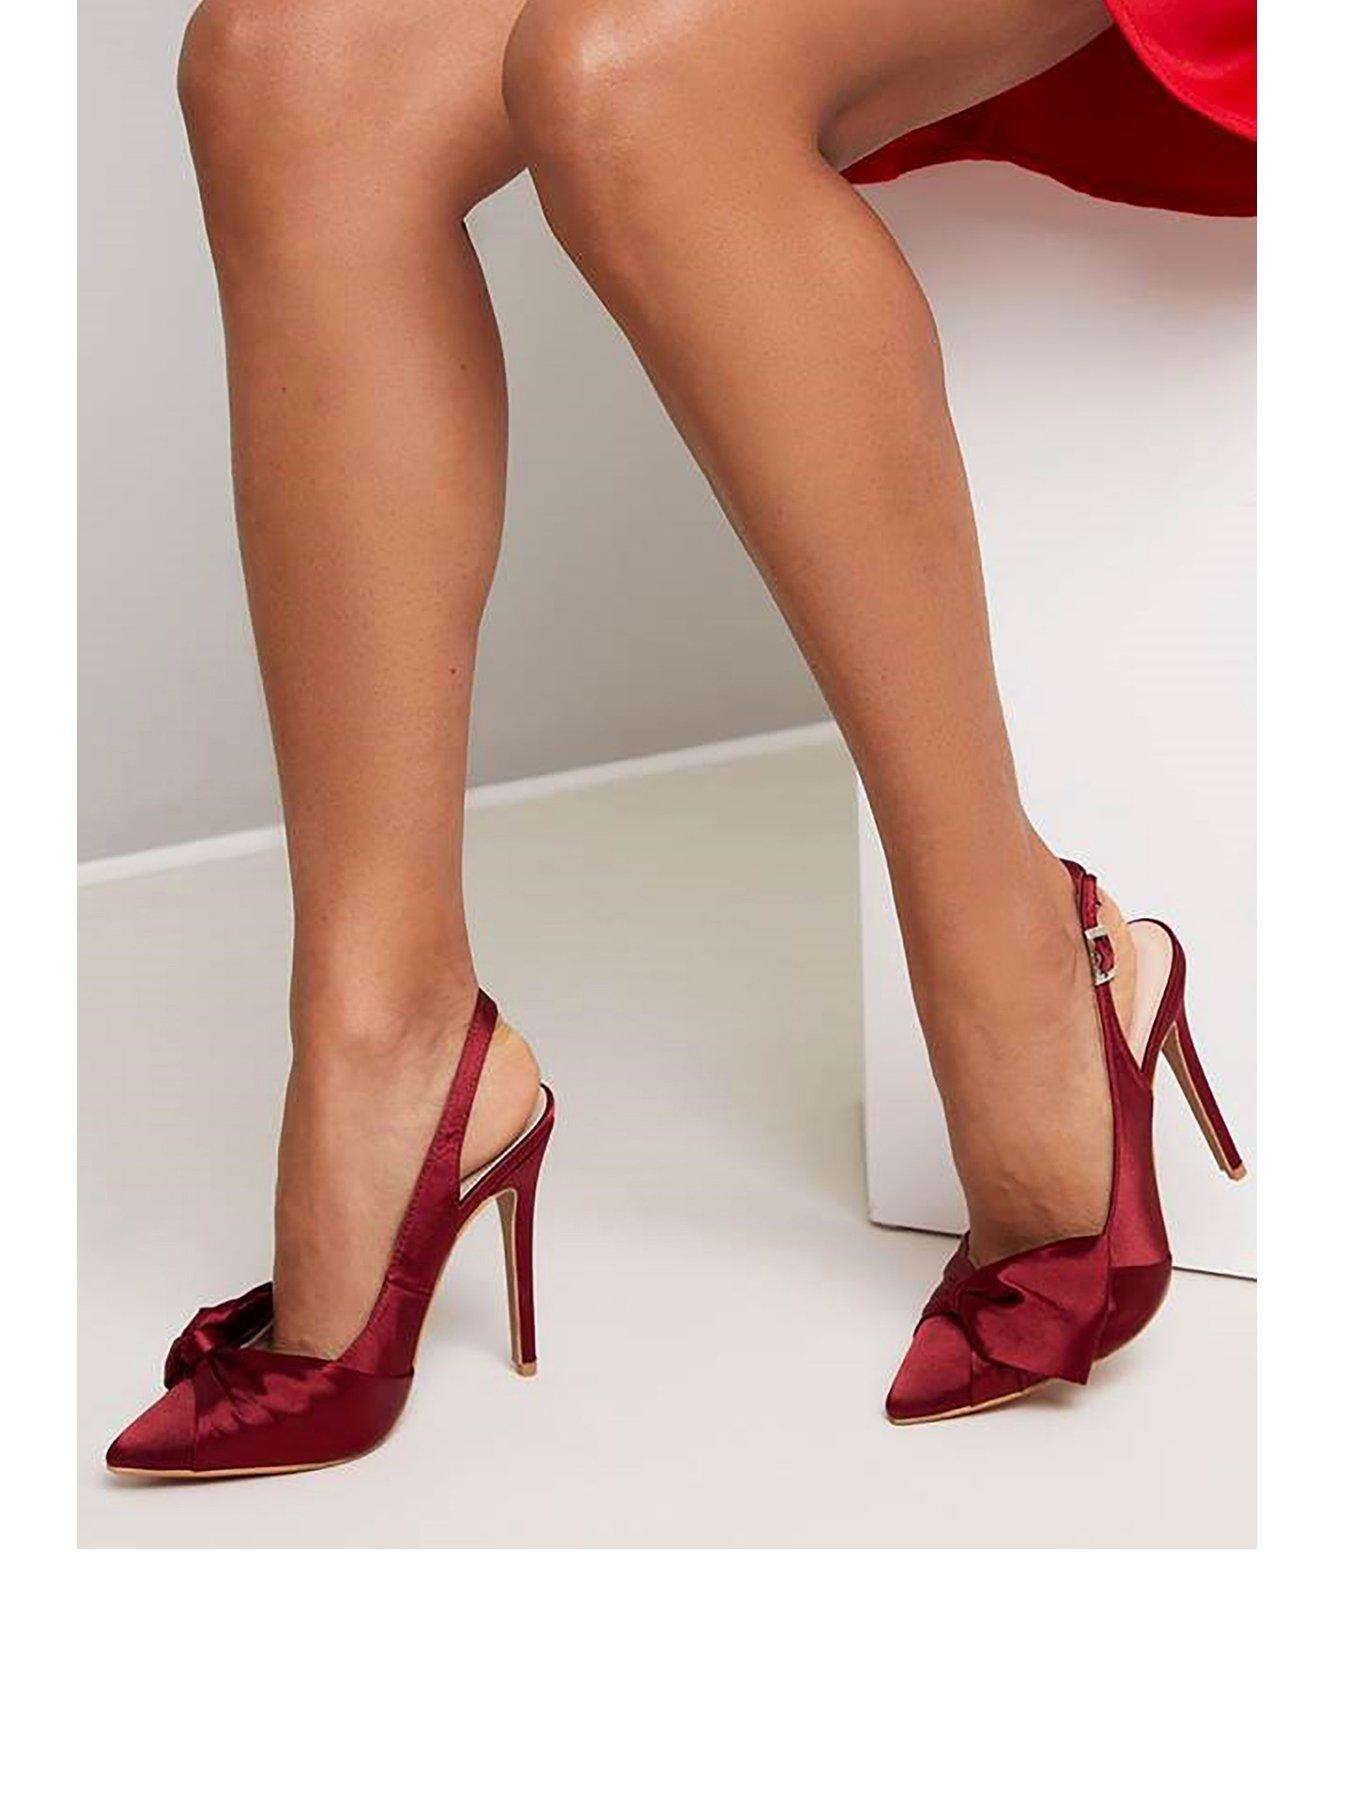 burgundy pumps with ankle strap